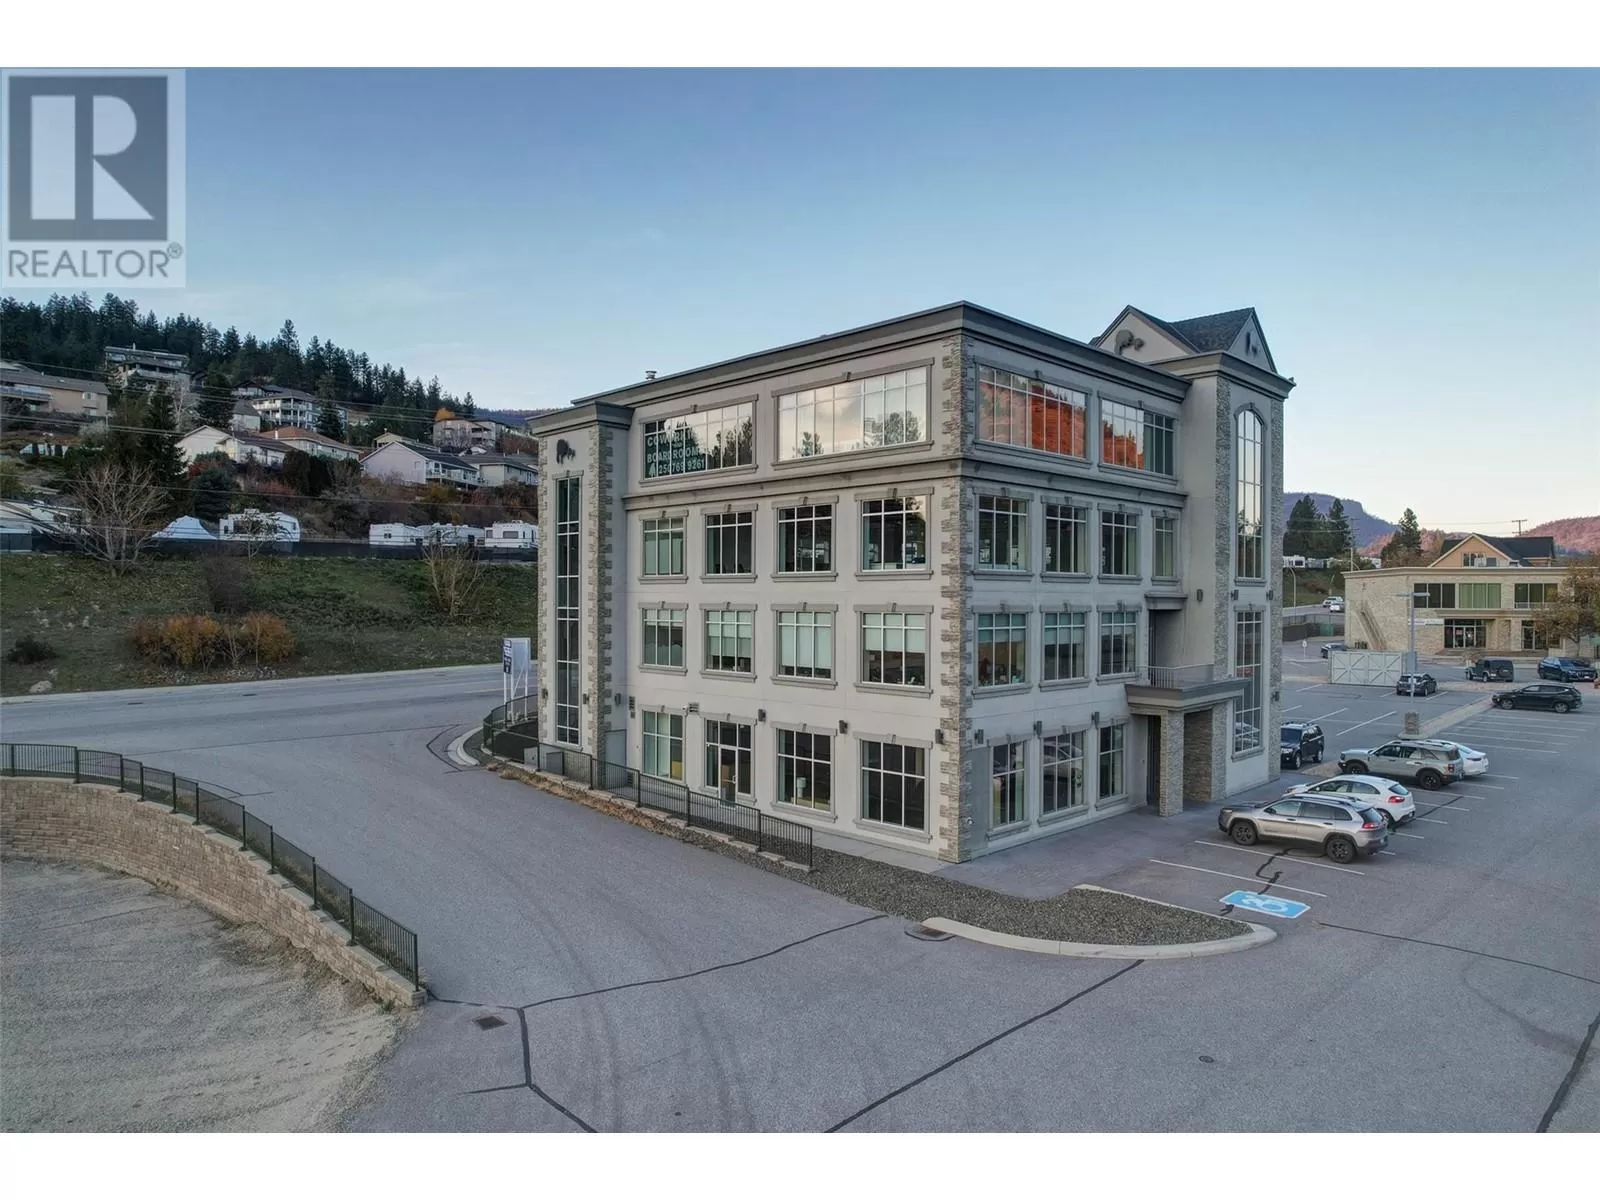 Offices for rent: 1979 Old Okanagan Highway Unit# 302, Westbank, British Columbia V4T 3A4